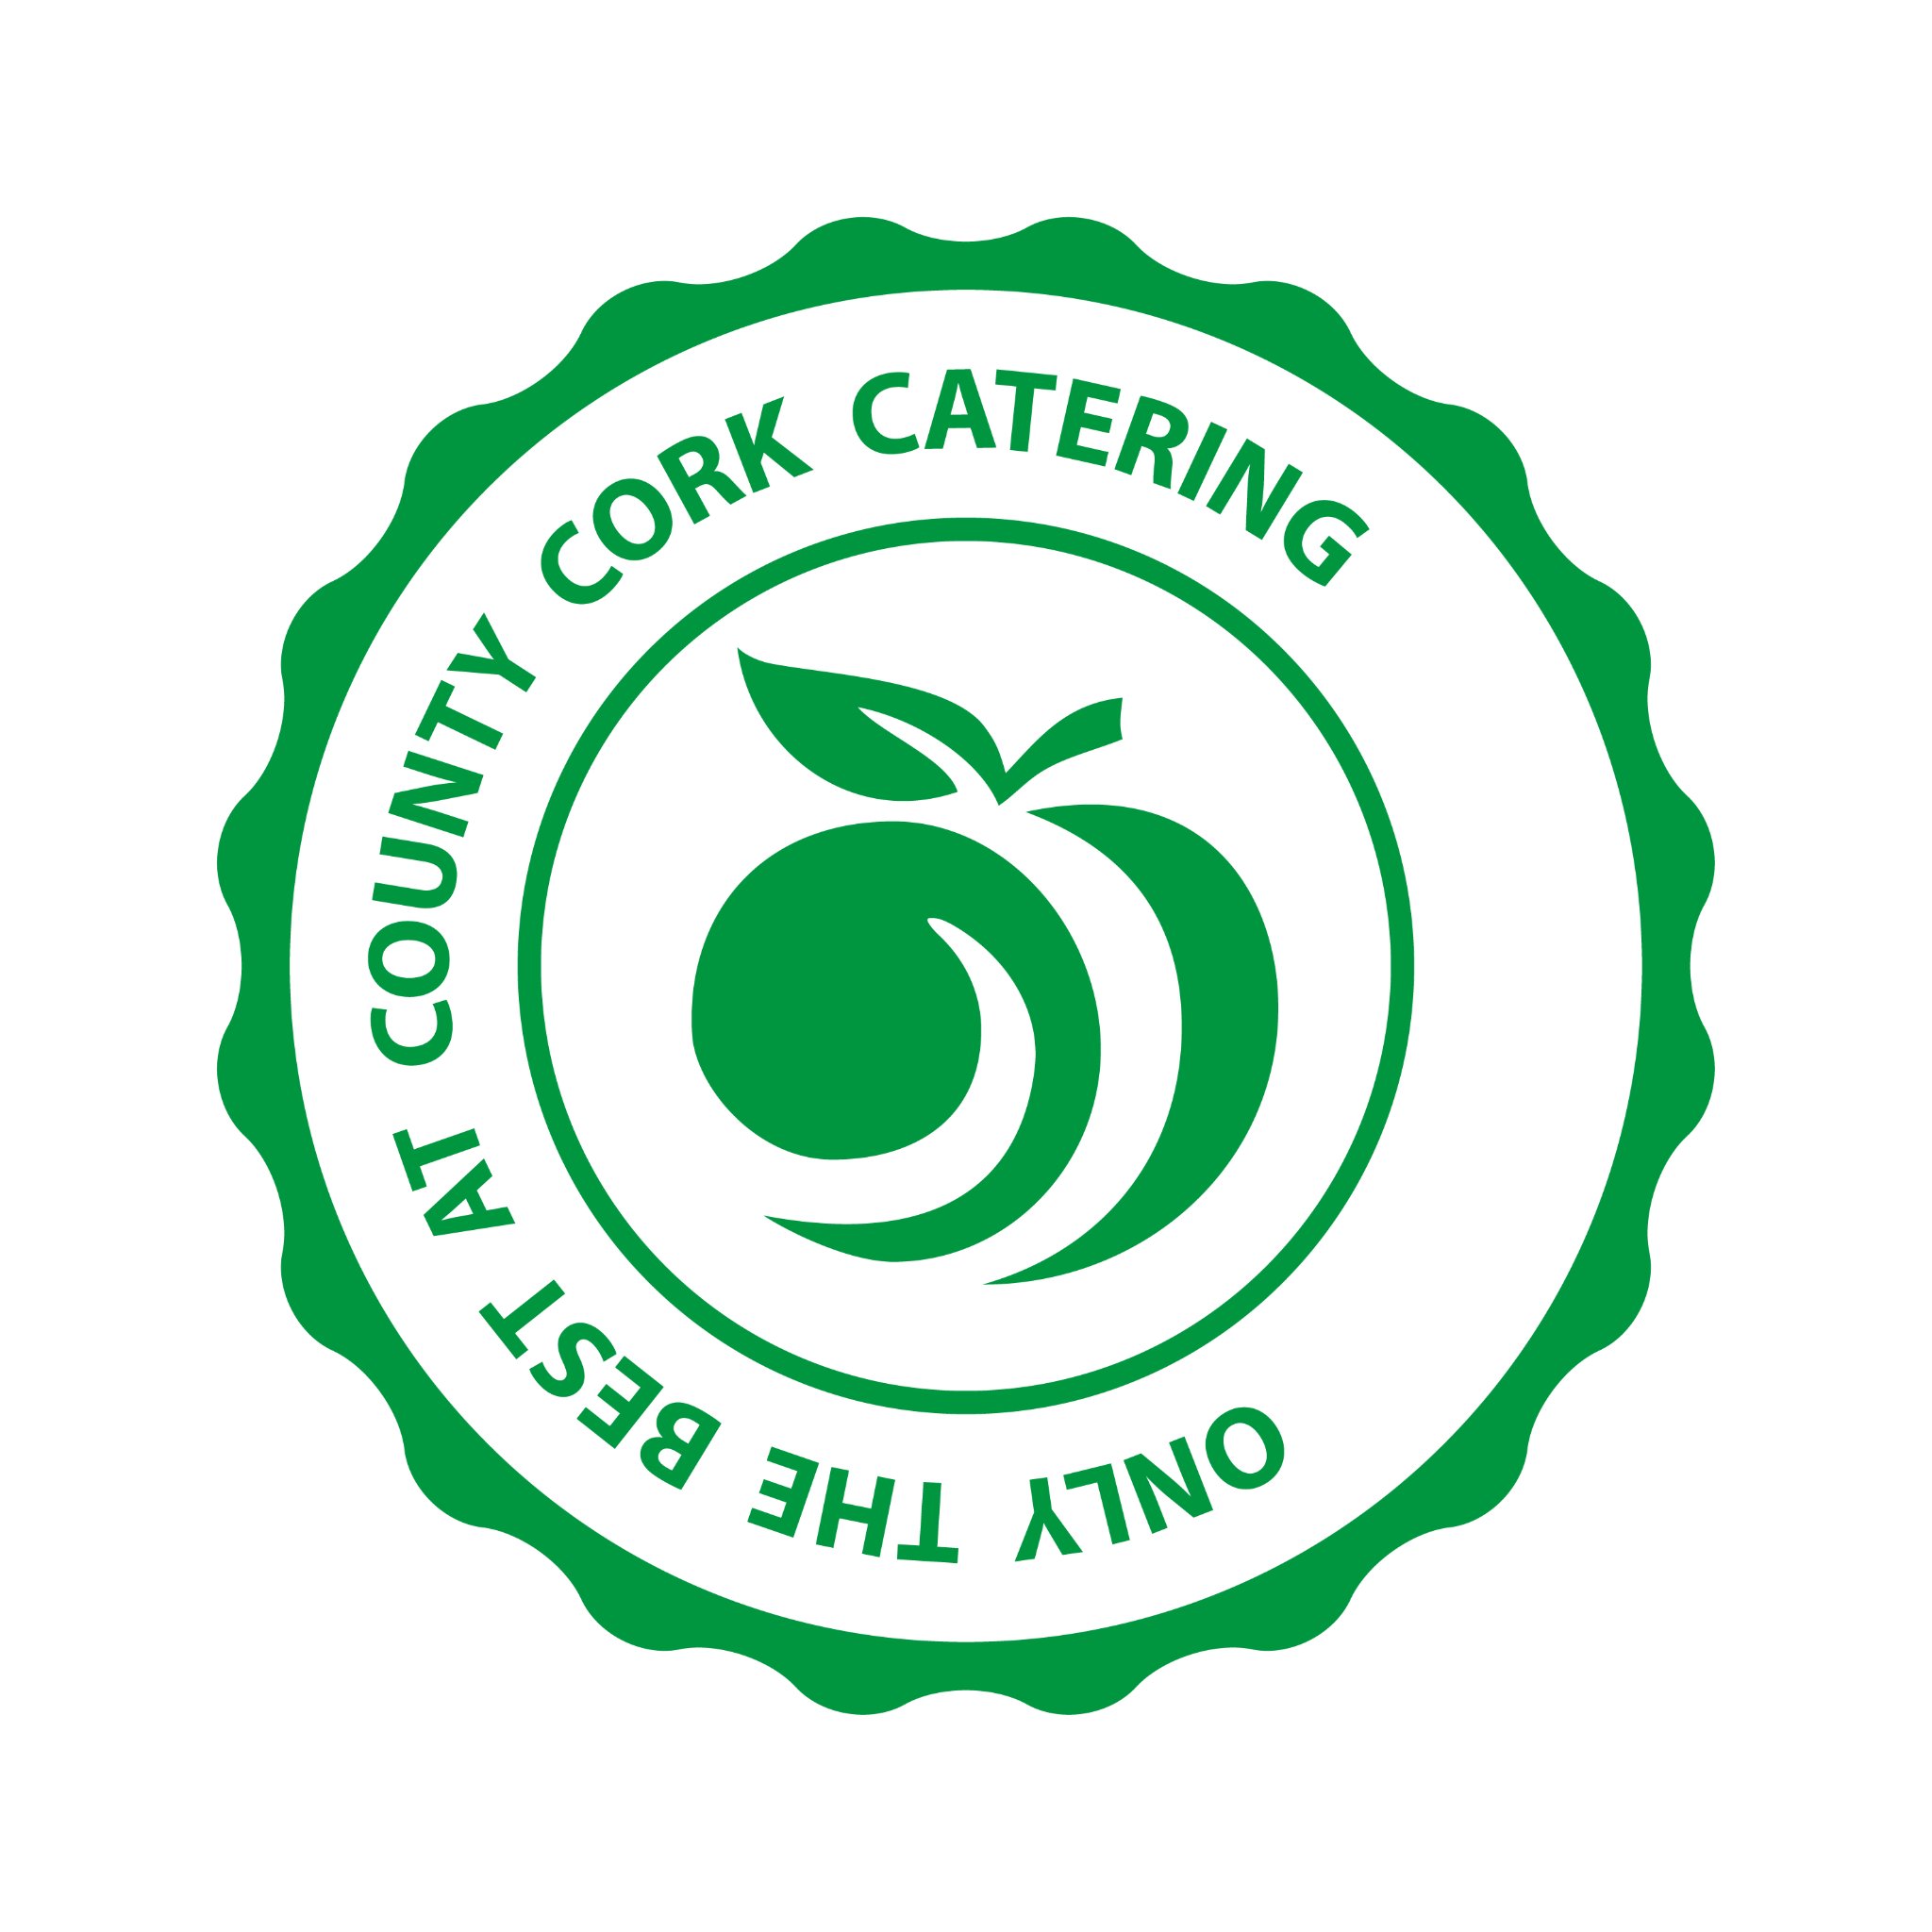 County Cork Catering focuses on delivering delicious, high-quality food with an elegant service to Nottingham and Derby.